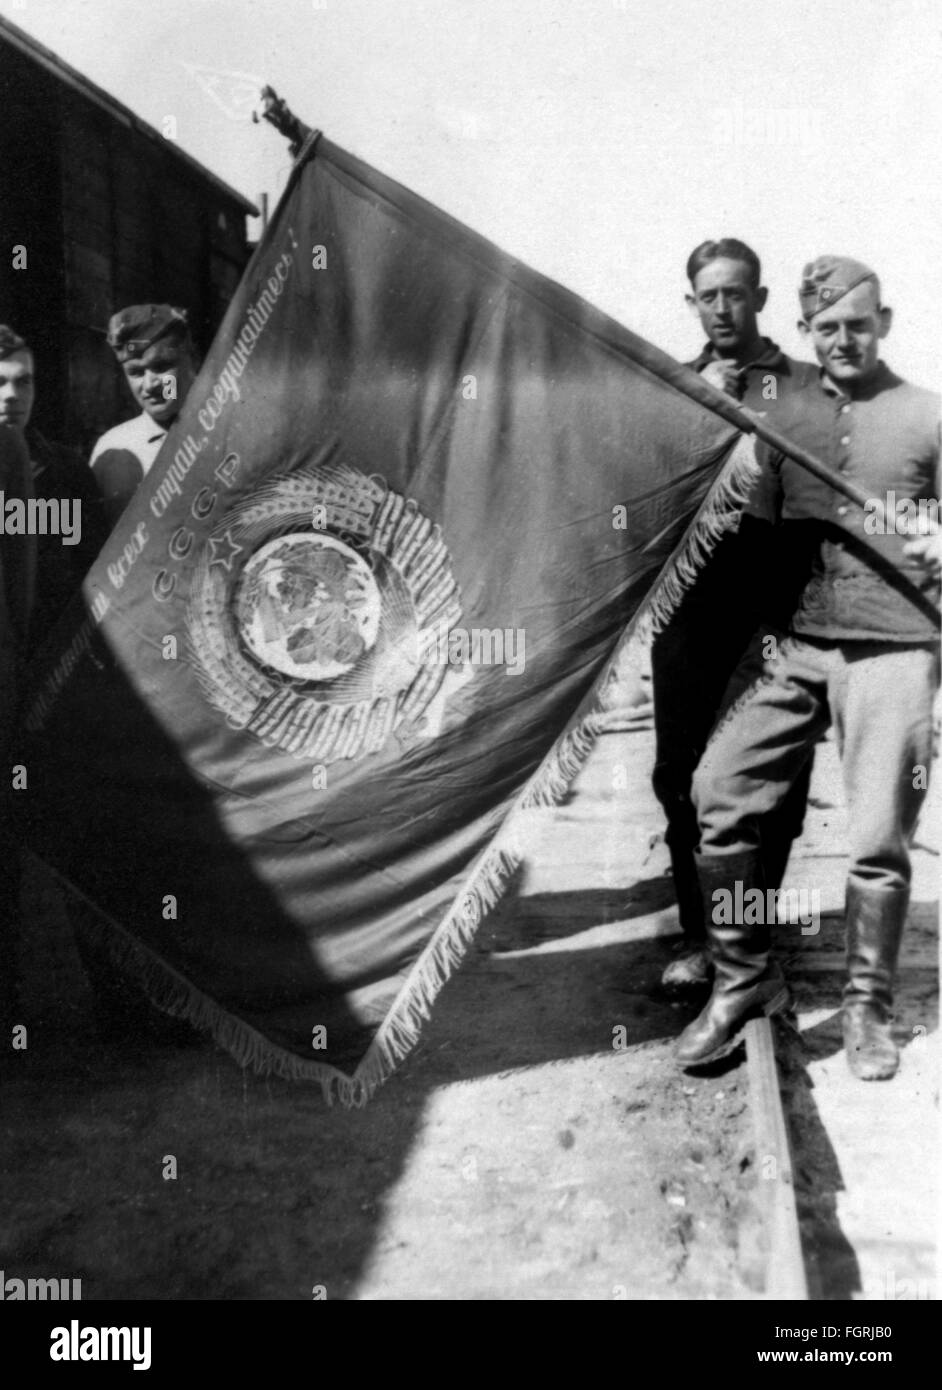 Second World War / WWII, Russia, German military railway engineers with a captured Soviet regimental flag, circa 1942, Additional-Rights-Clearences-Not Available Stock Photo